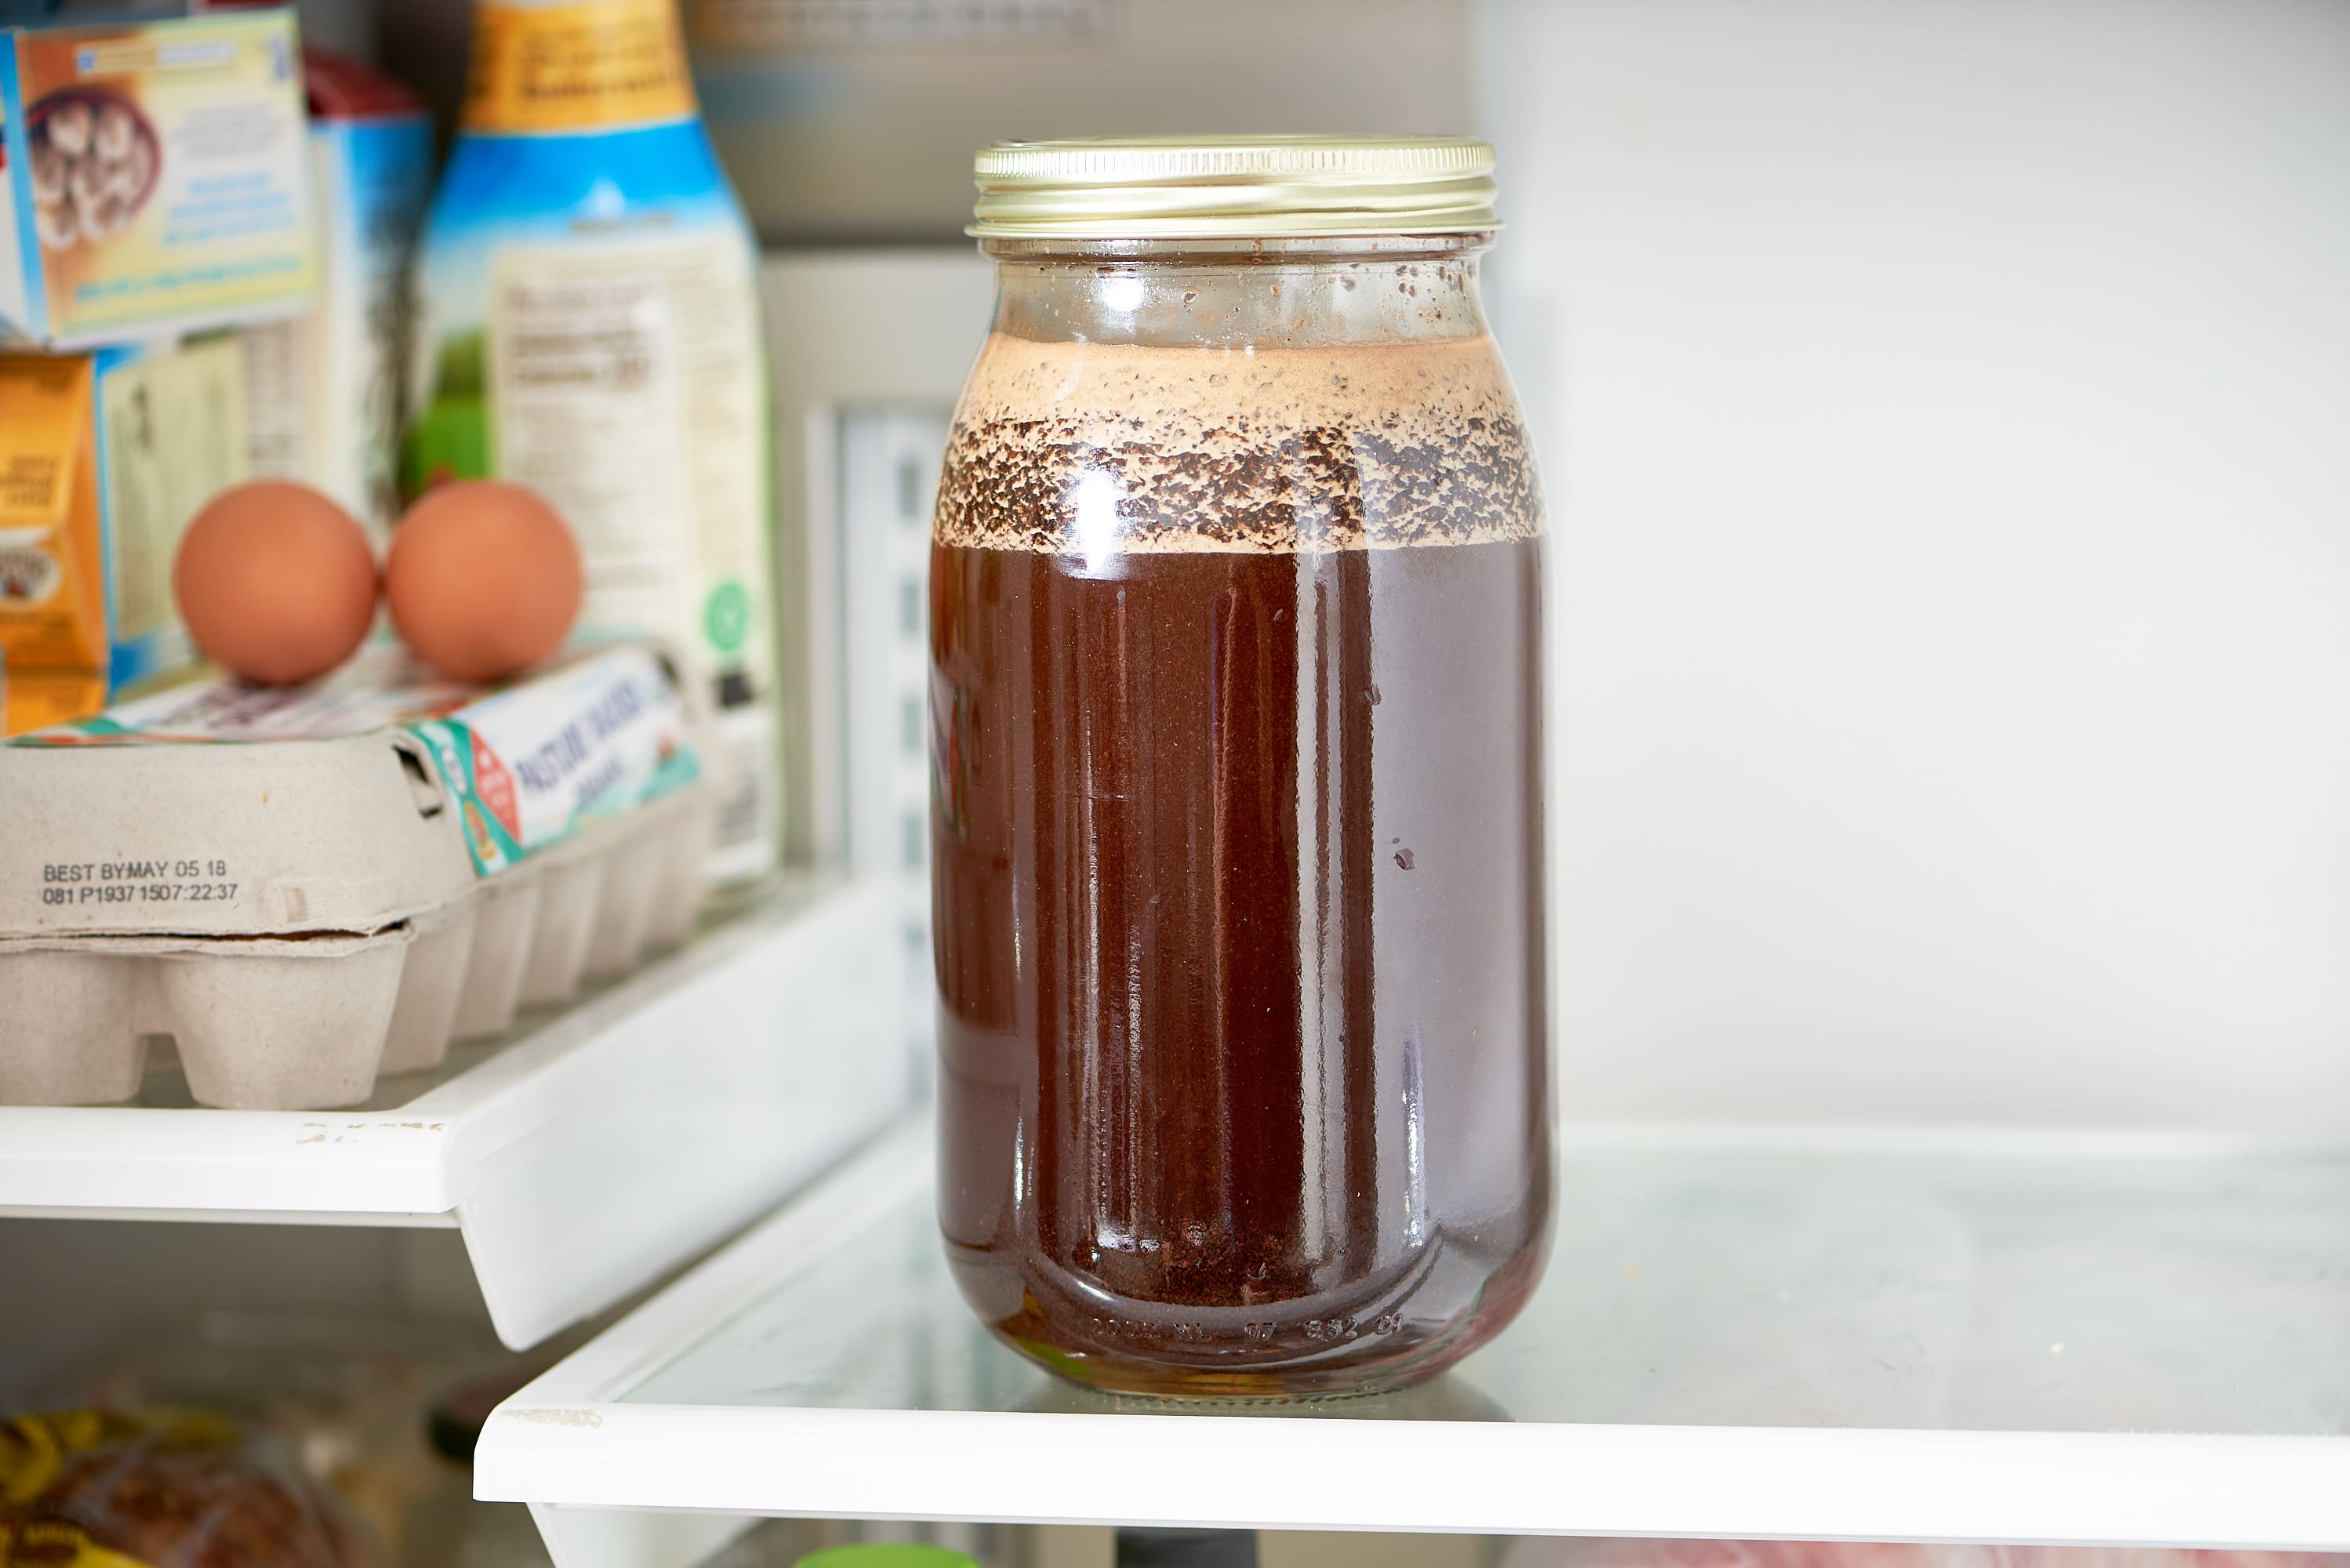 How to Make Cold Brew Coffee - Recipe Girl®